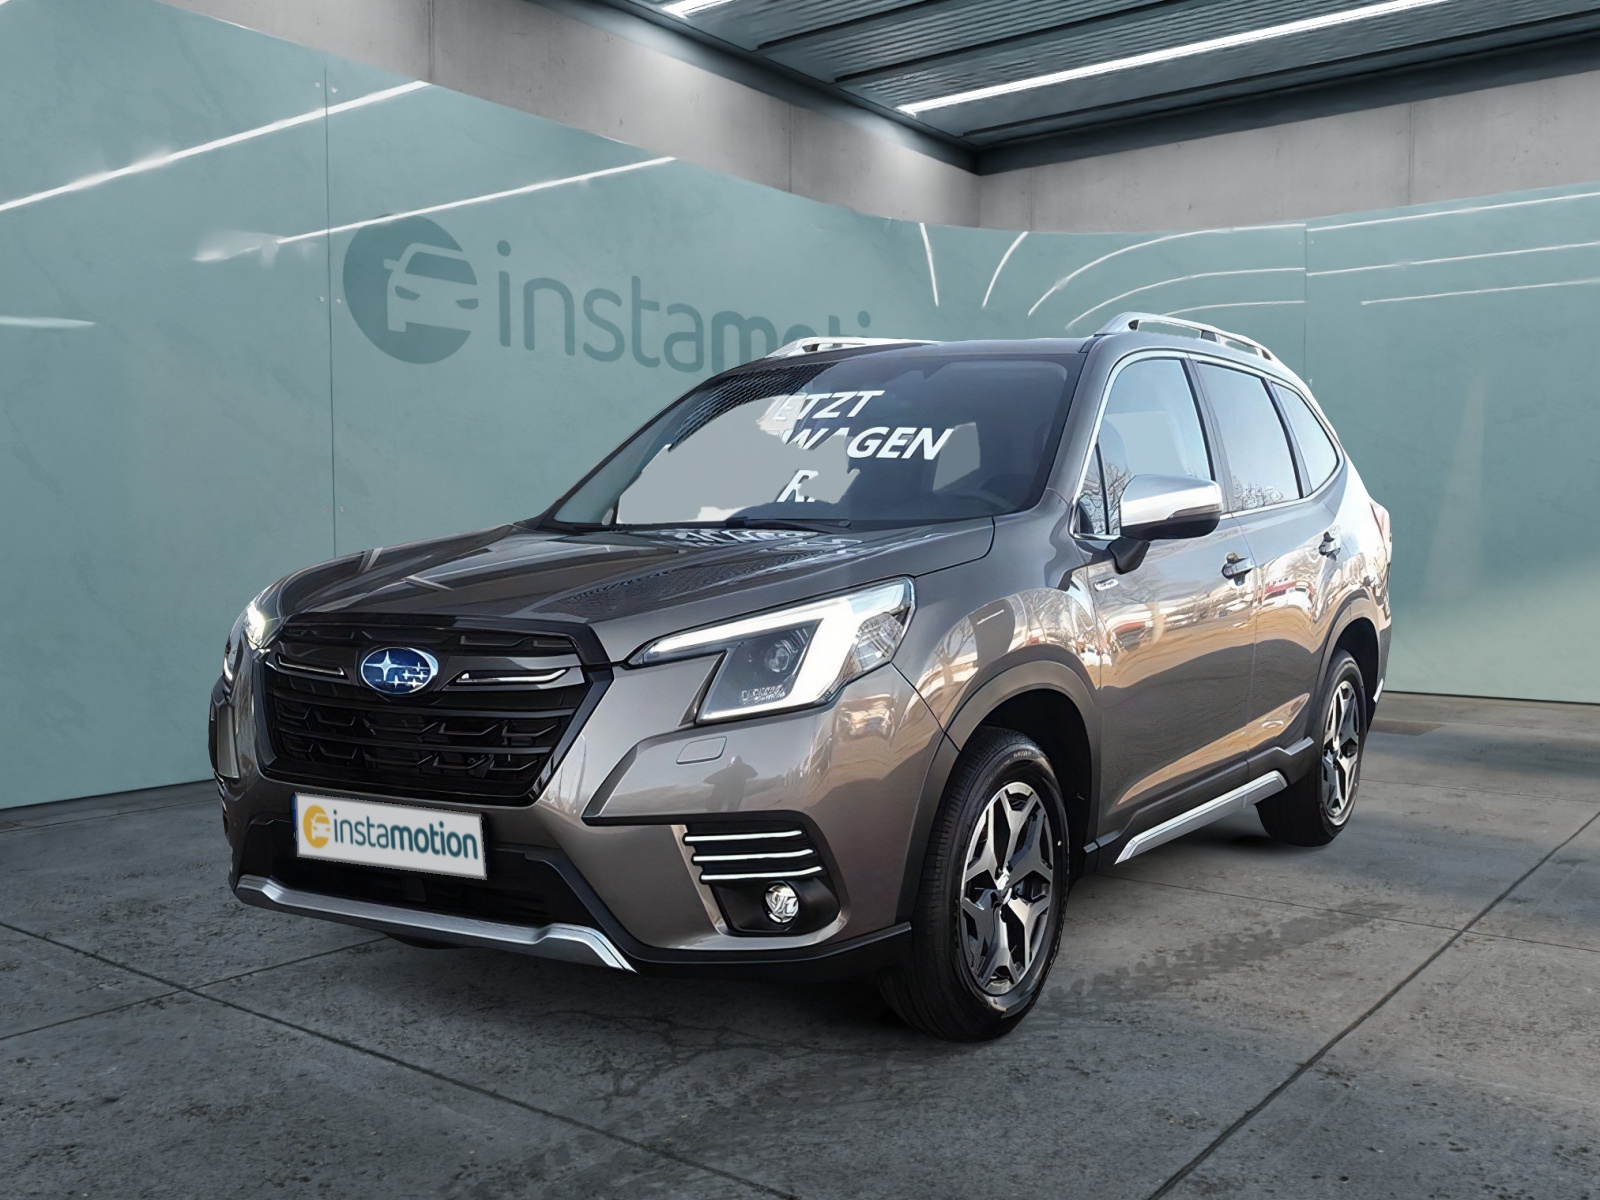 Subaru Forester 2.0 ie Active MJ23